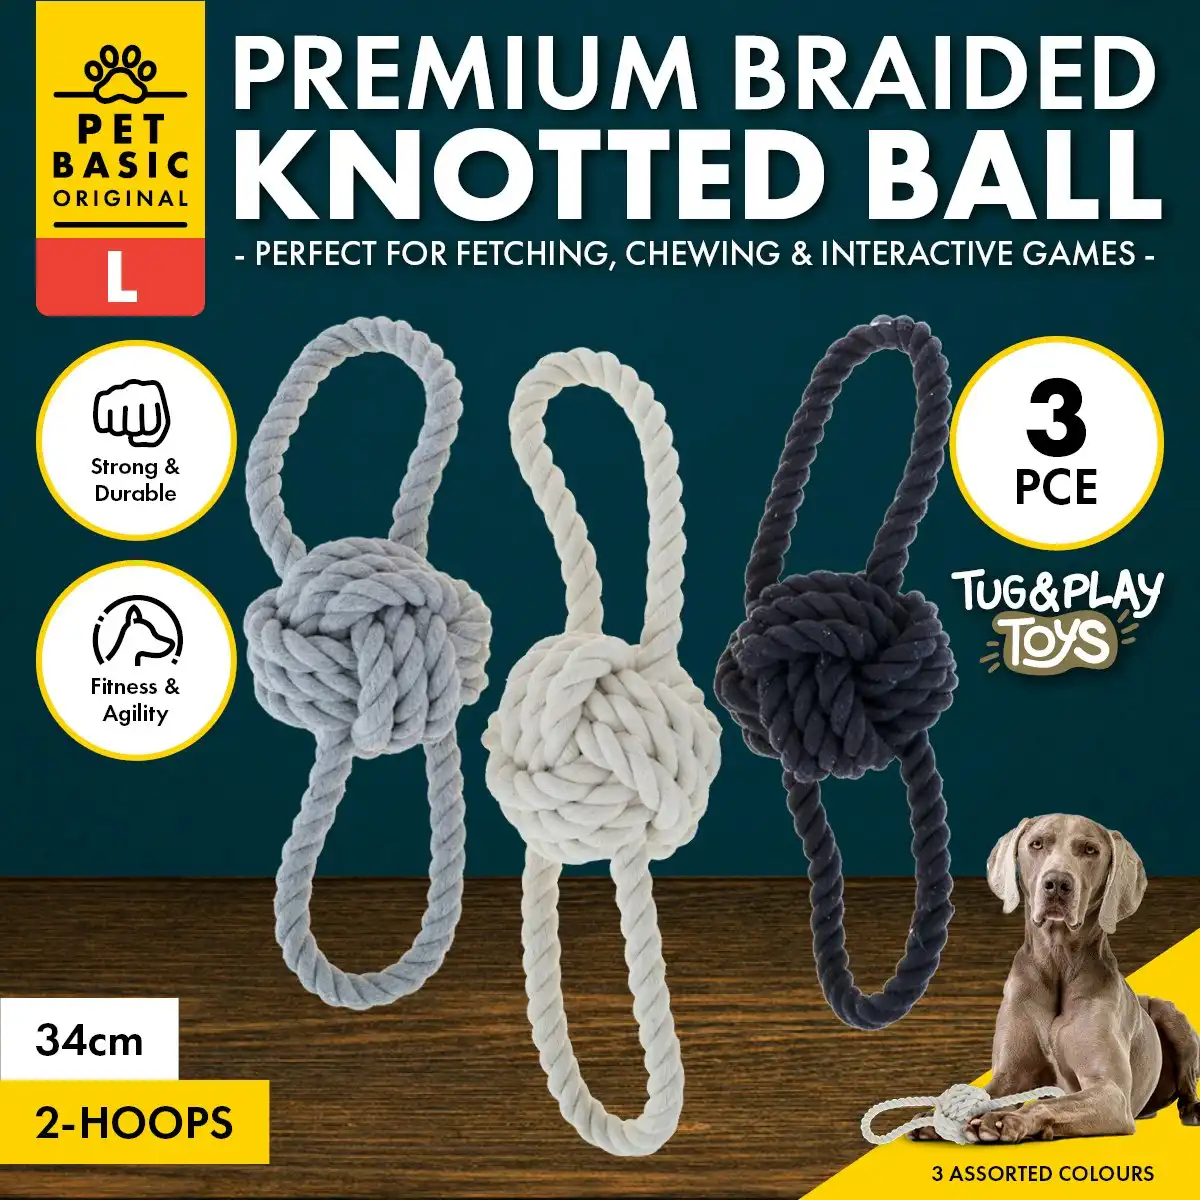 Pet Basic 3PCE Premium Braided Rope Knotted Ball & Loops Natural Fibres 34cm